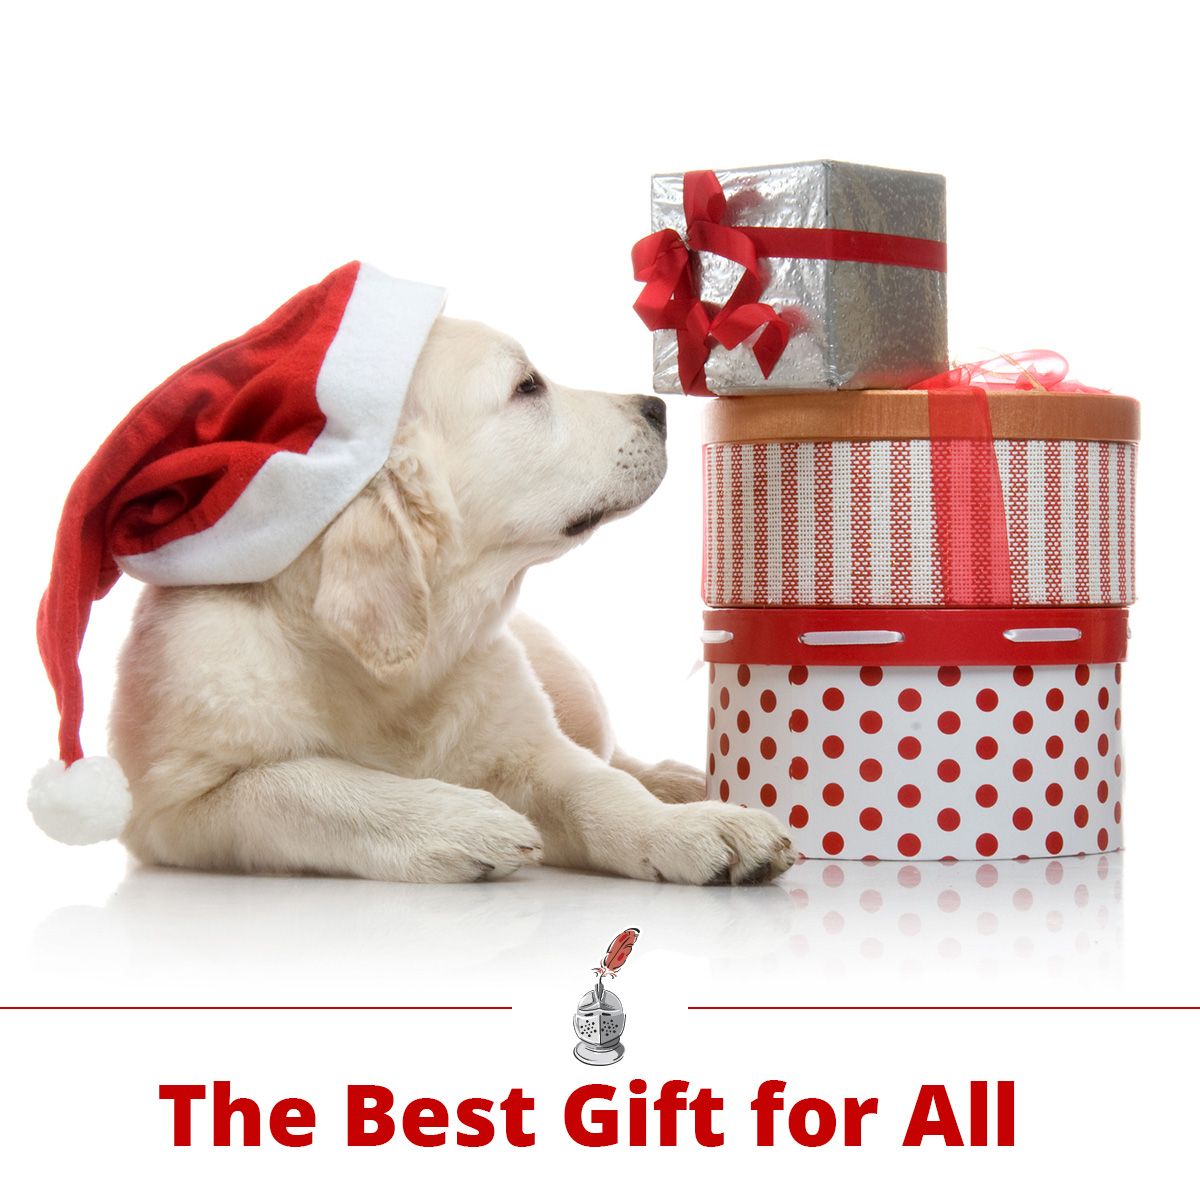 The Best Gift for All